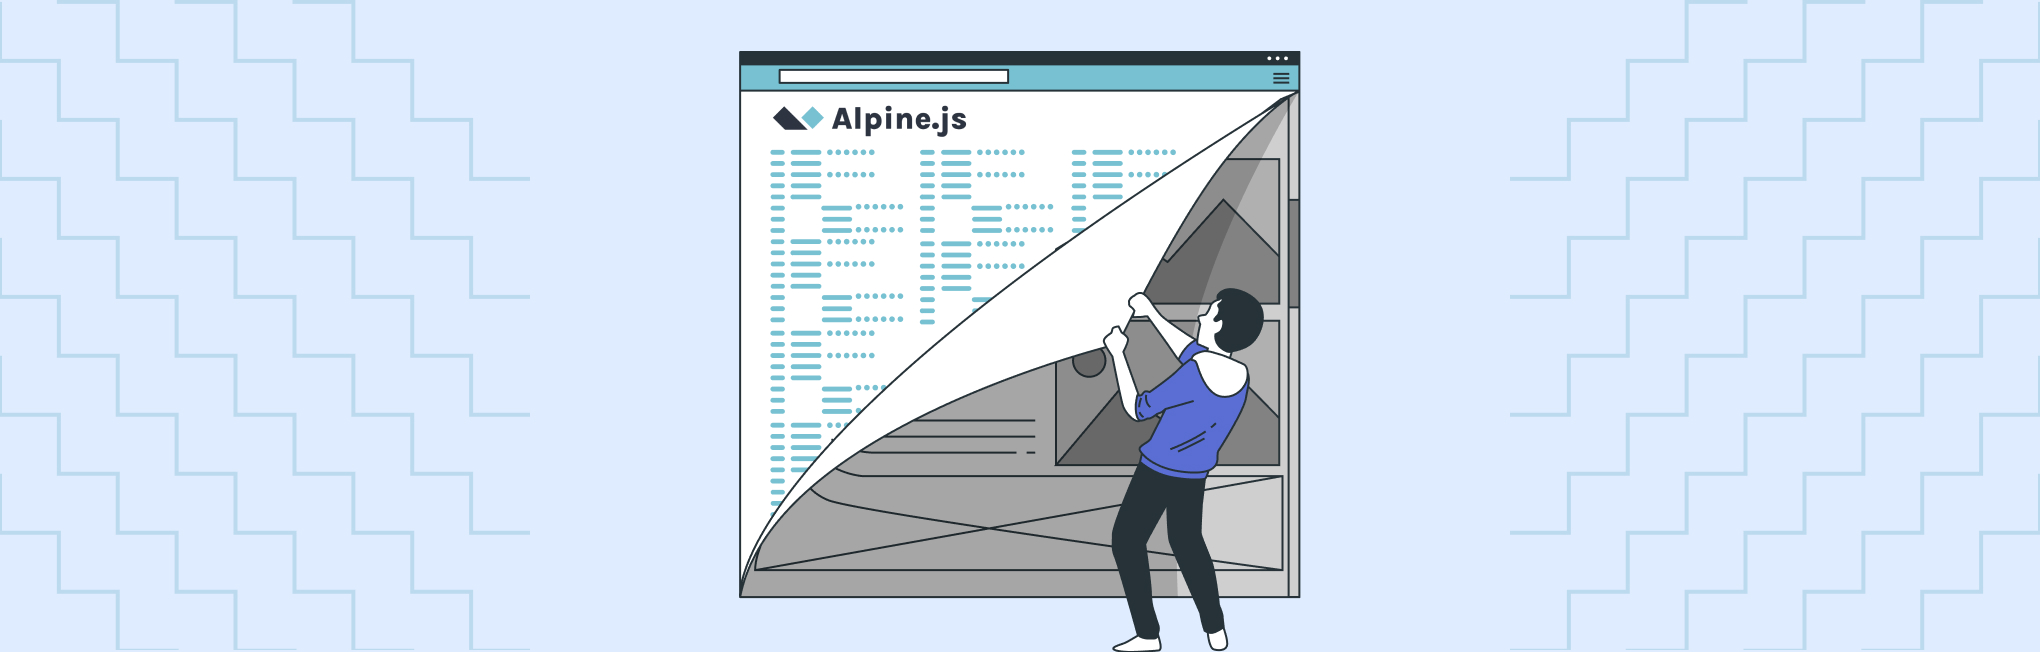 Working with Alpine.js in Hyva themes.